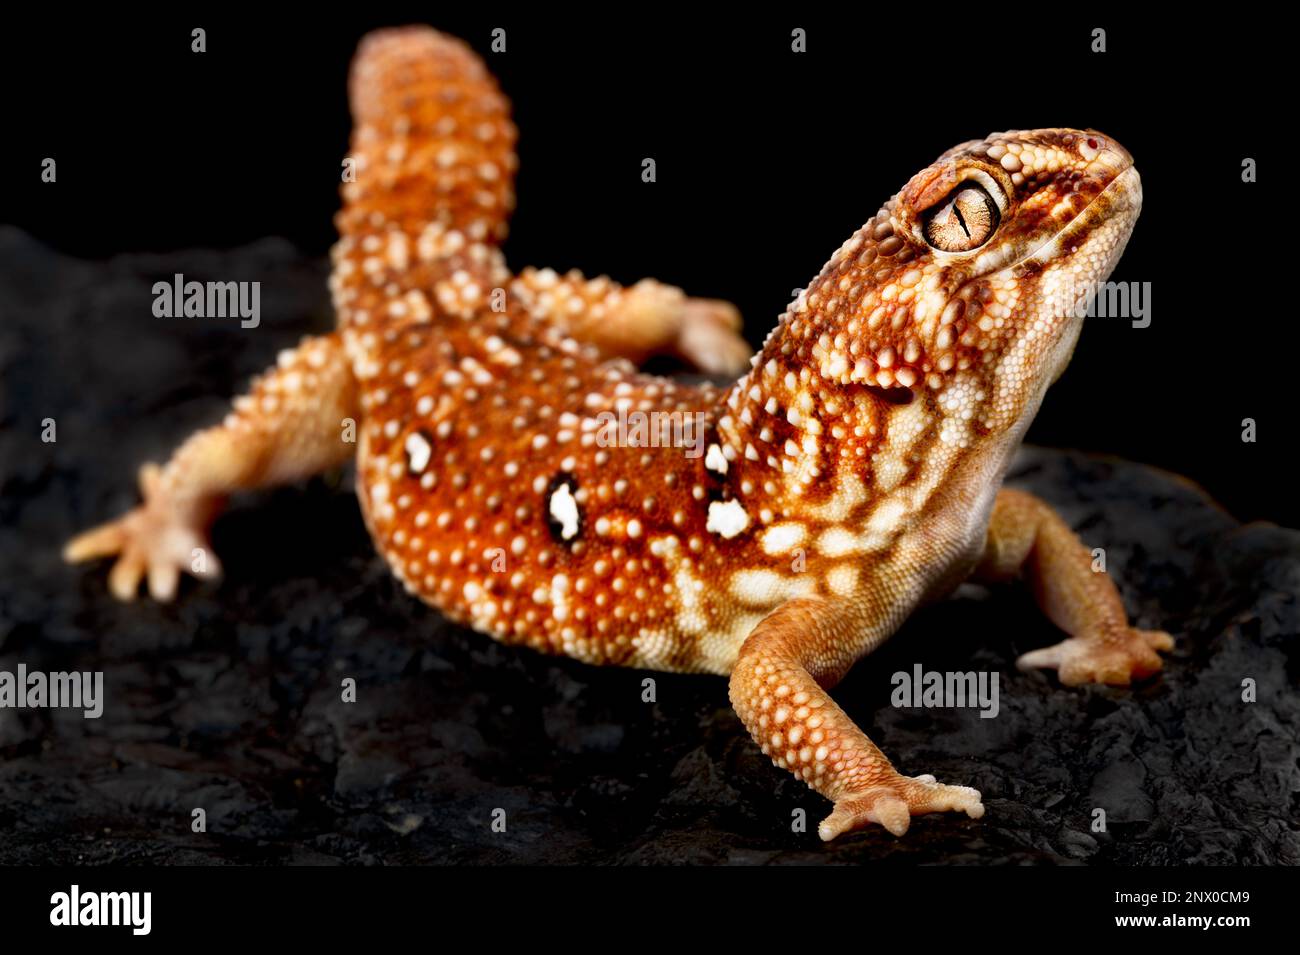 South African giant ground gecko (Chondrodactylus angulifer) Stock Photo